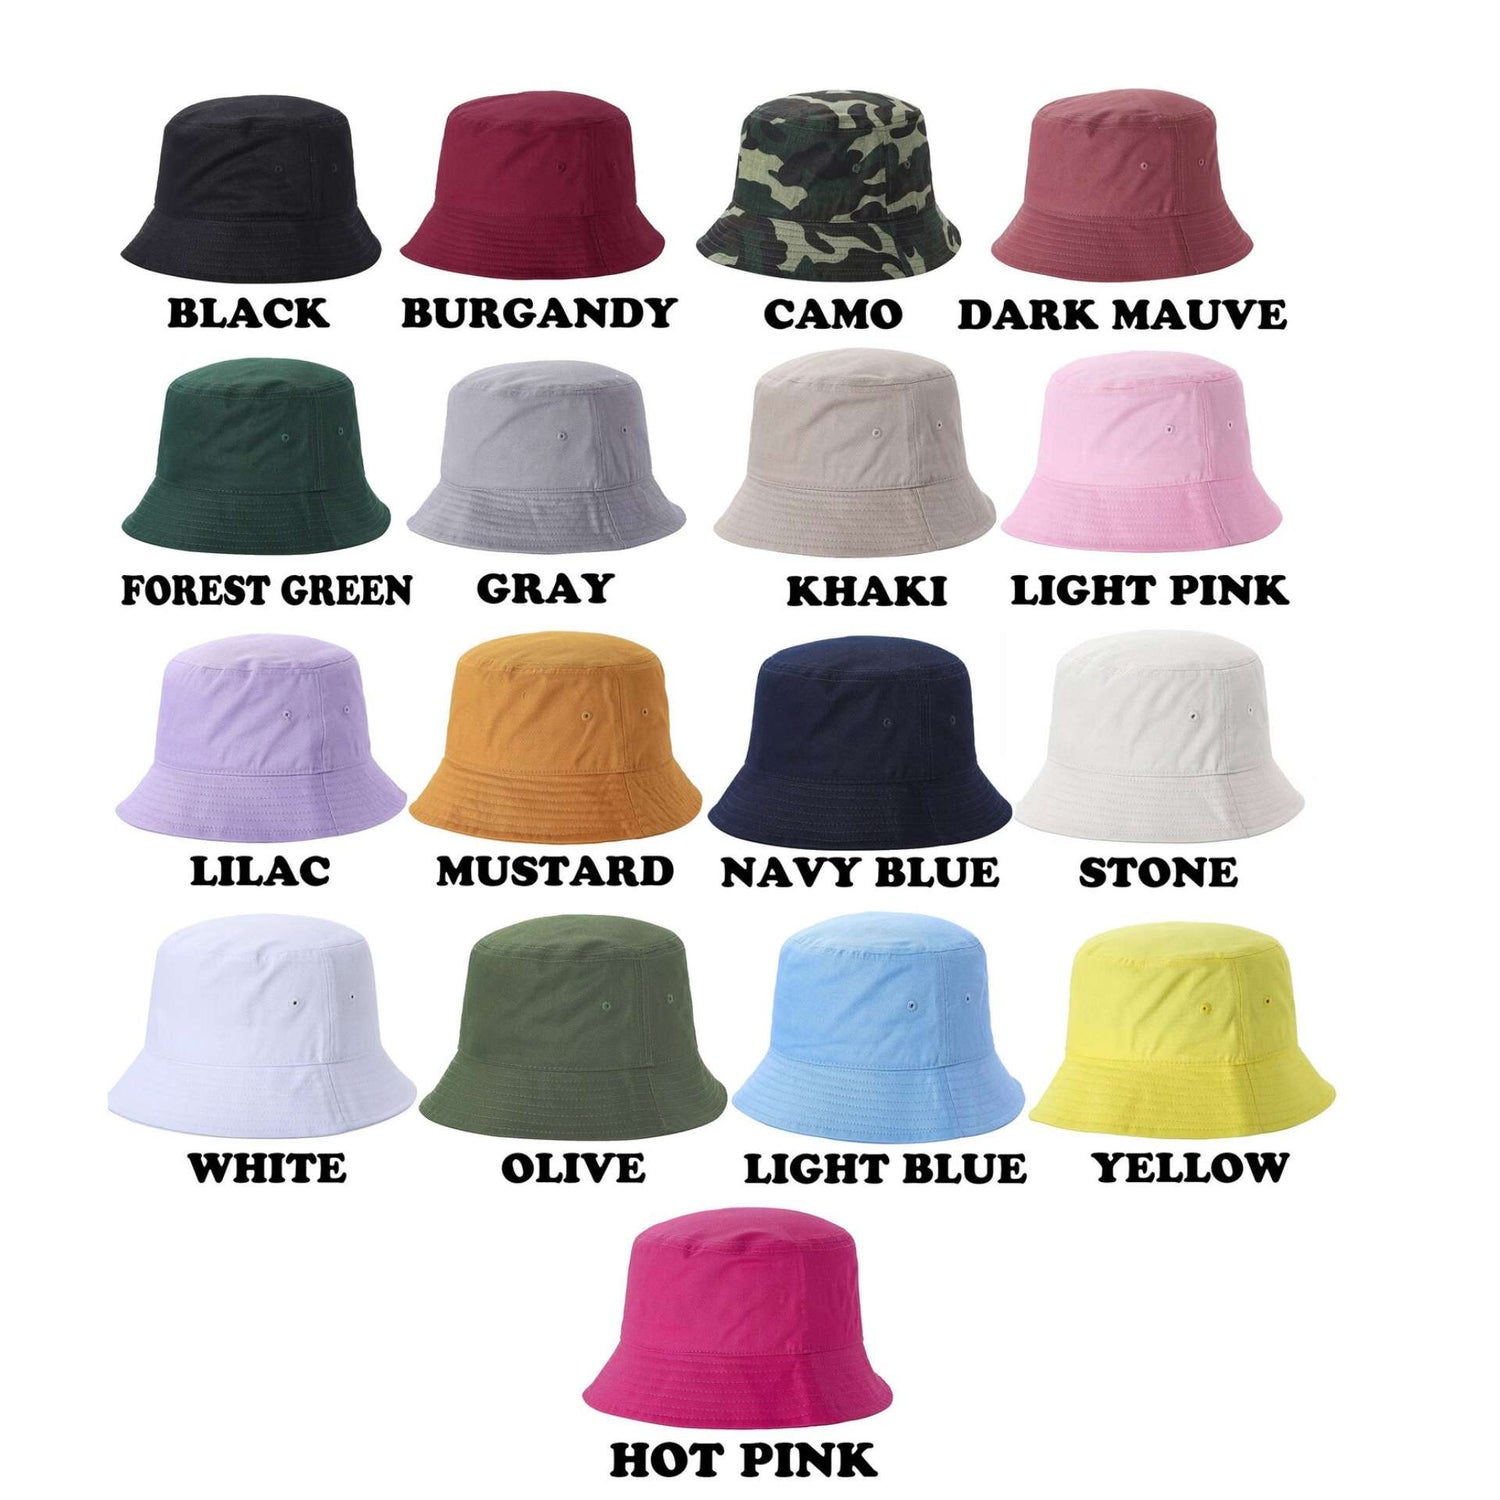 DSY Lifestyle Bucket Hats Color Chart